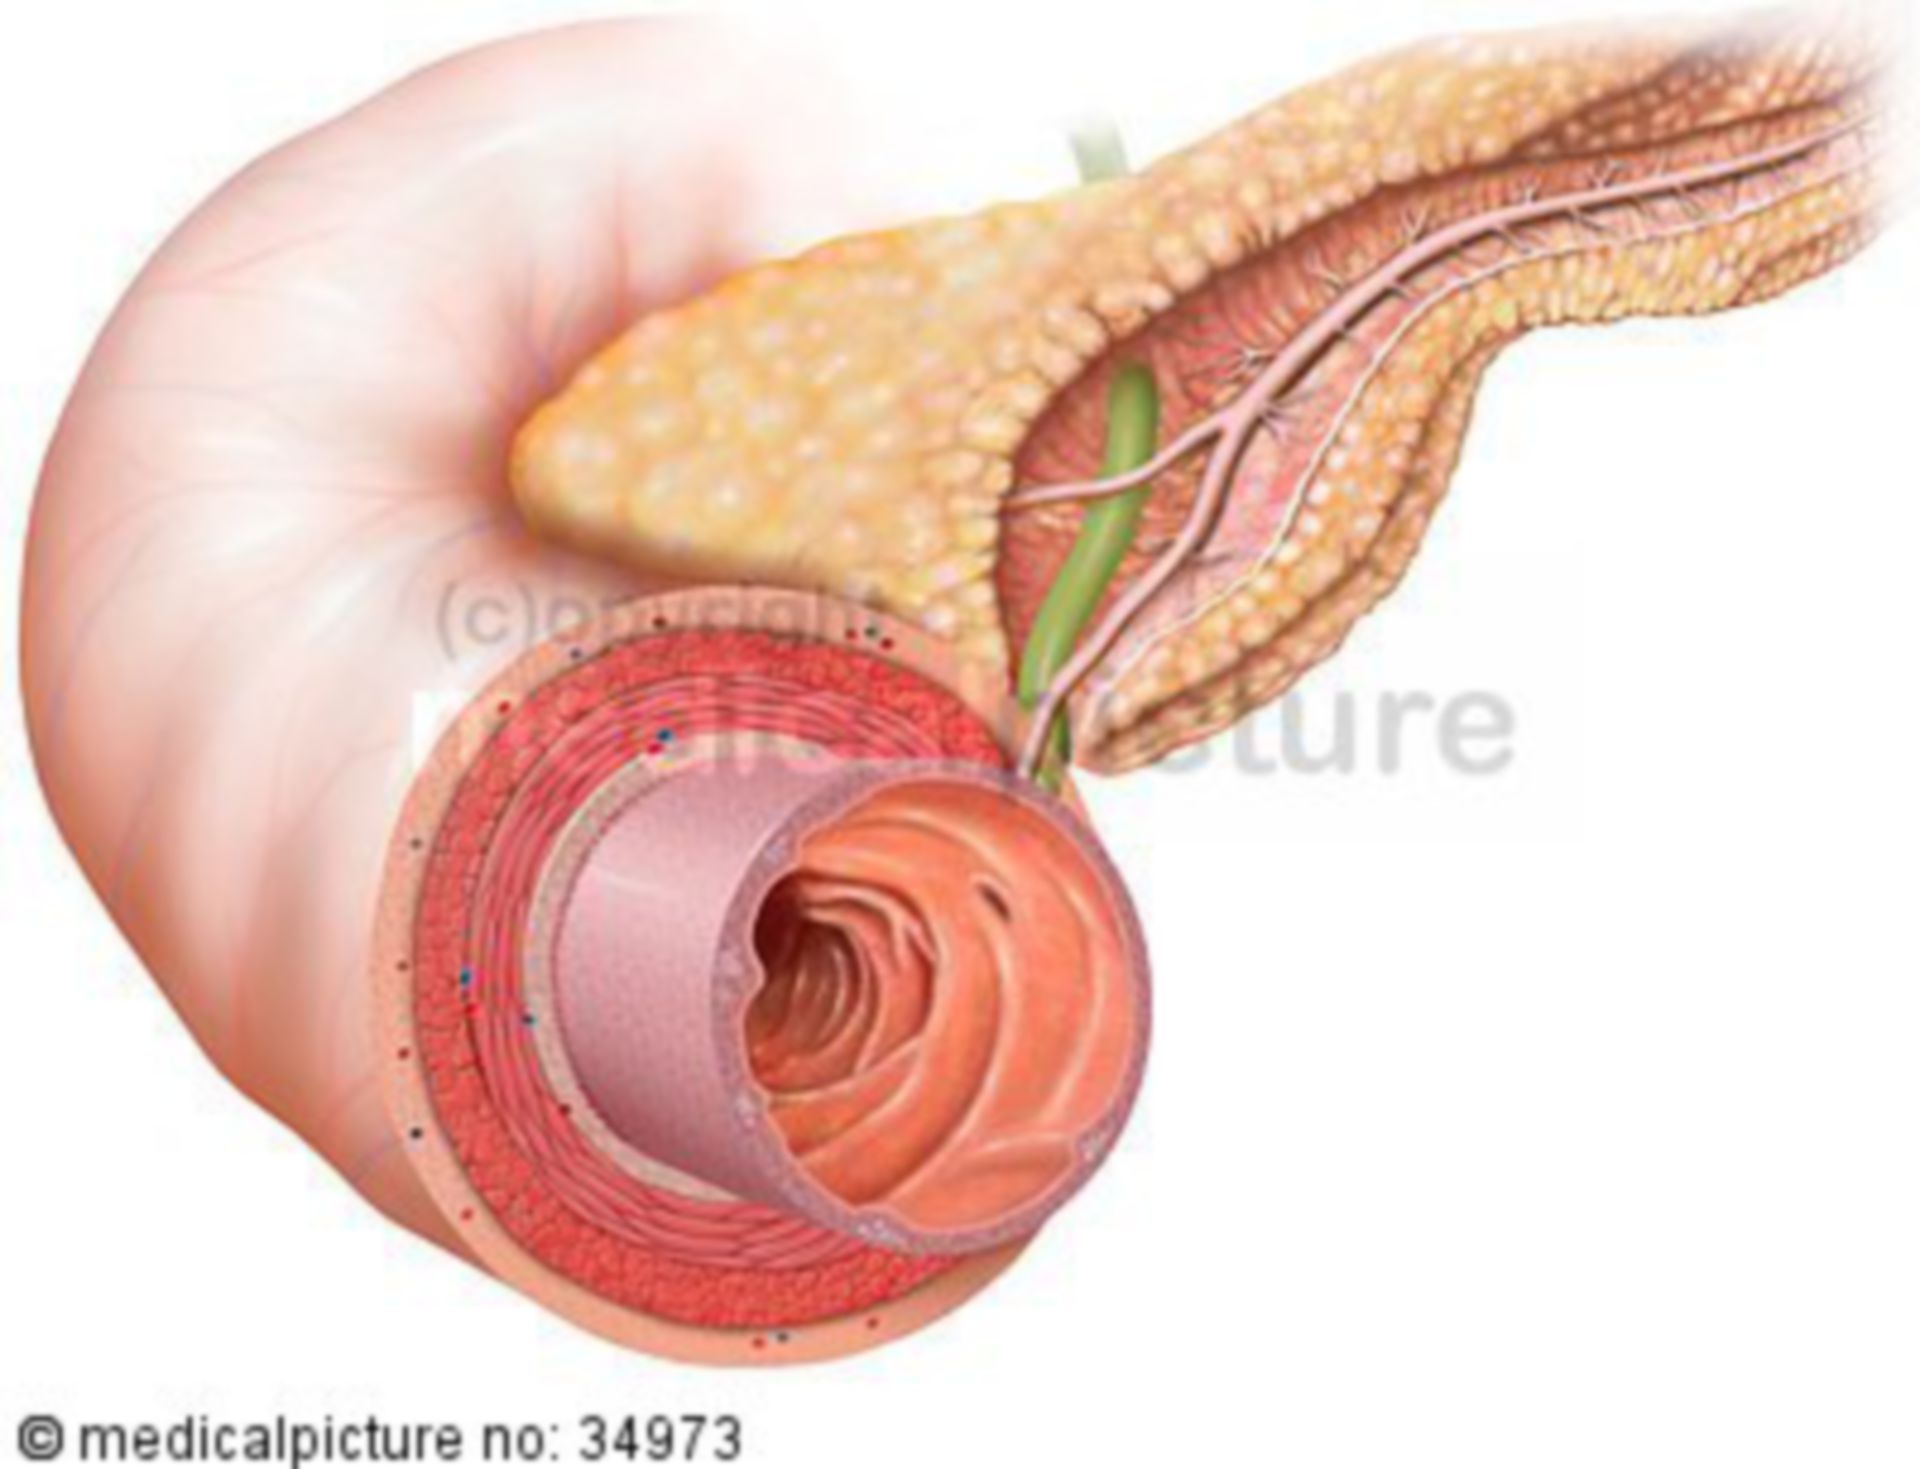 Duodenum and pancreas